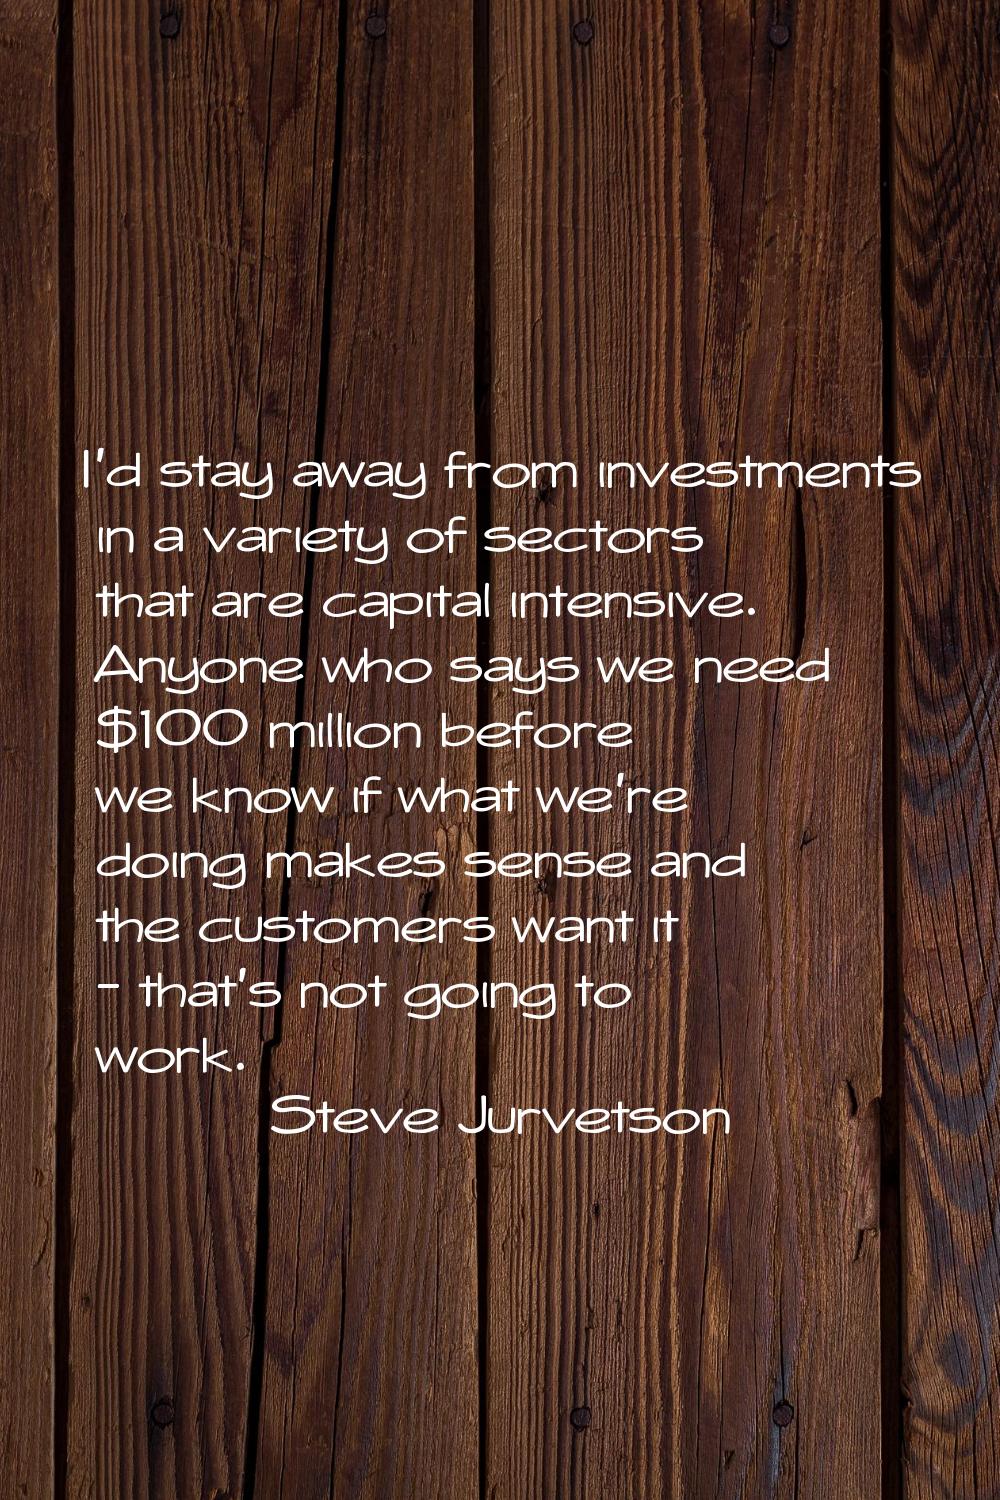 I'd stay away from investments in a variety of sectors that are capital intensive. Anyone who says 